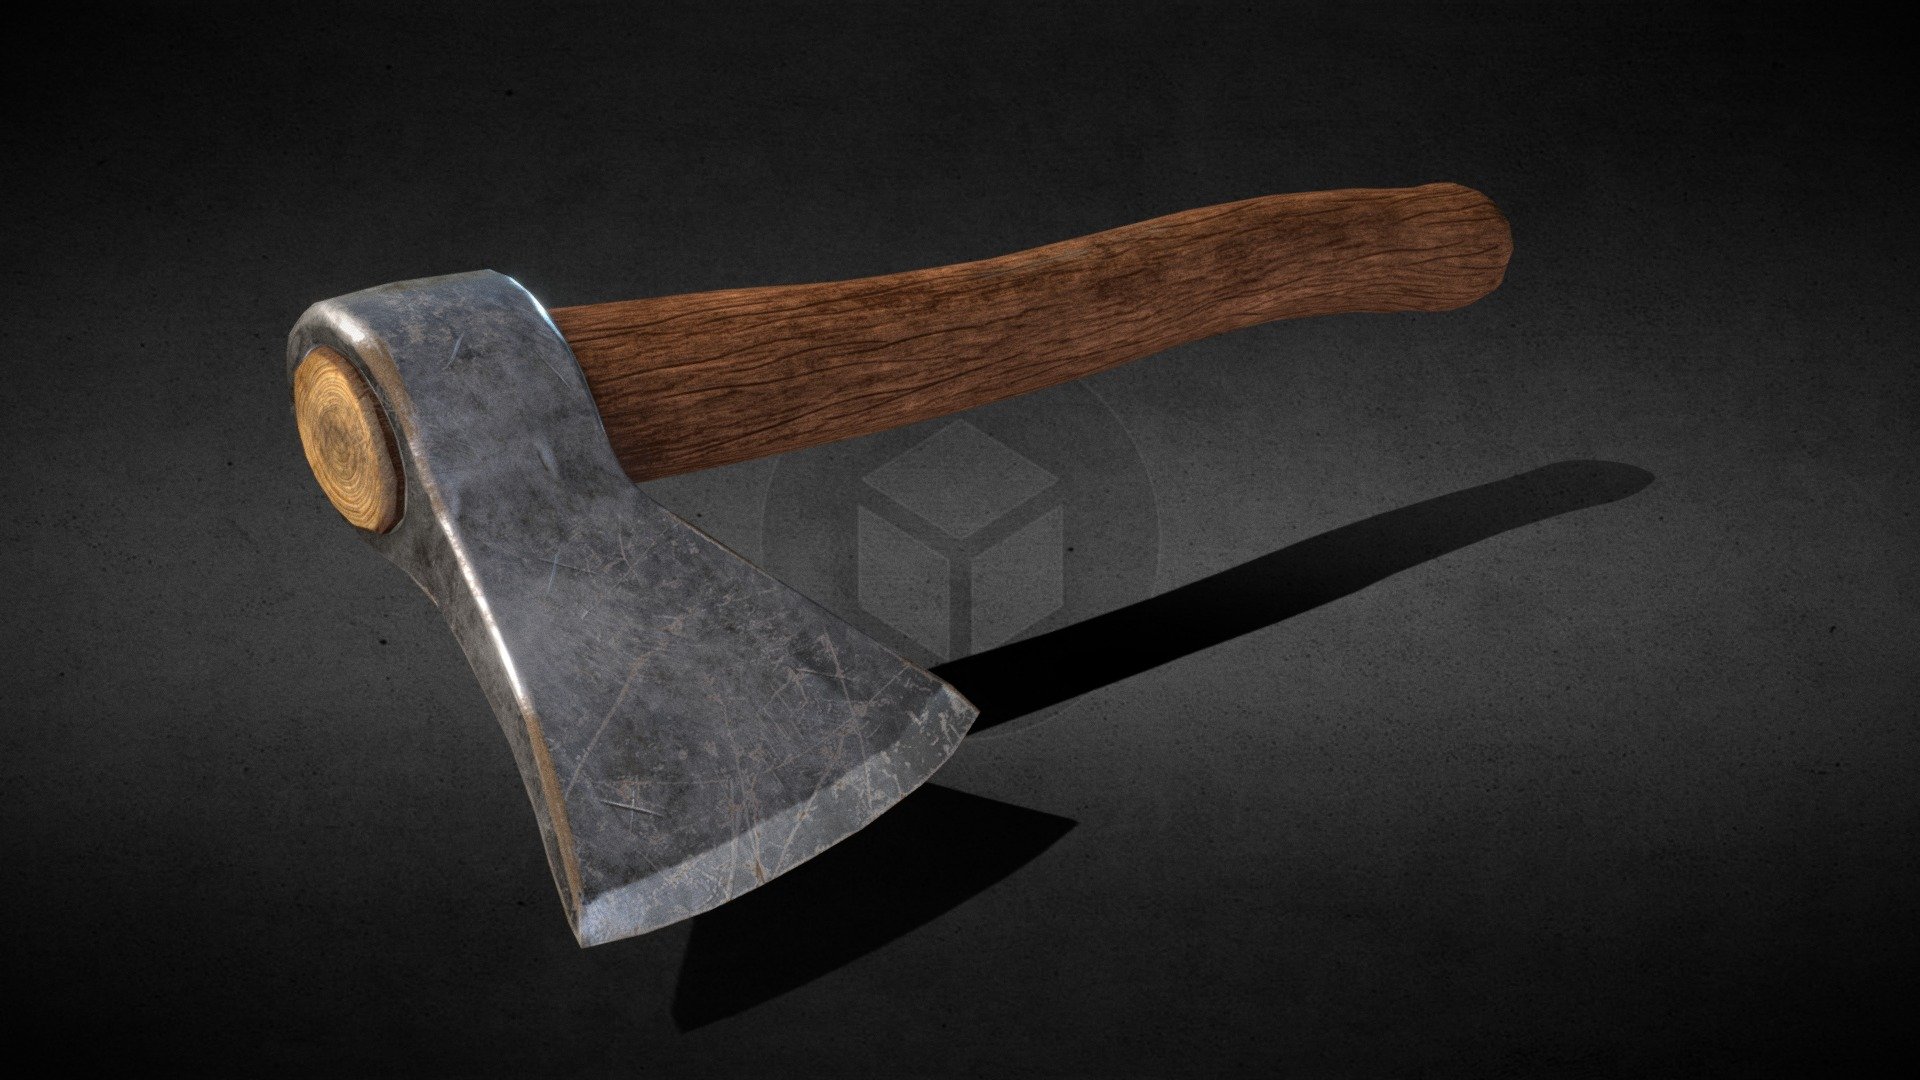 An Old Steampunk Axe ready for a game engine it has 5454 polys, 10886 tris, 10897 edges and 5447 verts the formats are .FBX .OBJ and .MB it has PBR Textures it includes Diffuse, Metallic, Normal and Roughness the size is 2048 x 2048 and the format are .PNG if you need 3D Game Assets or STL files I can do commission works 3d model